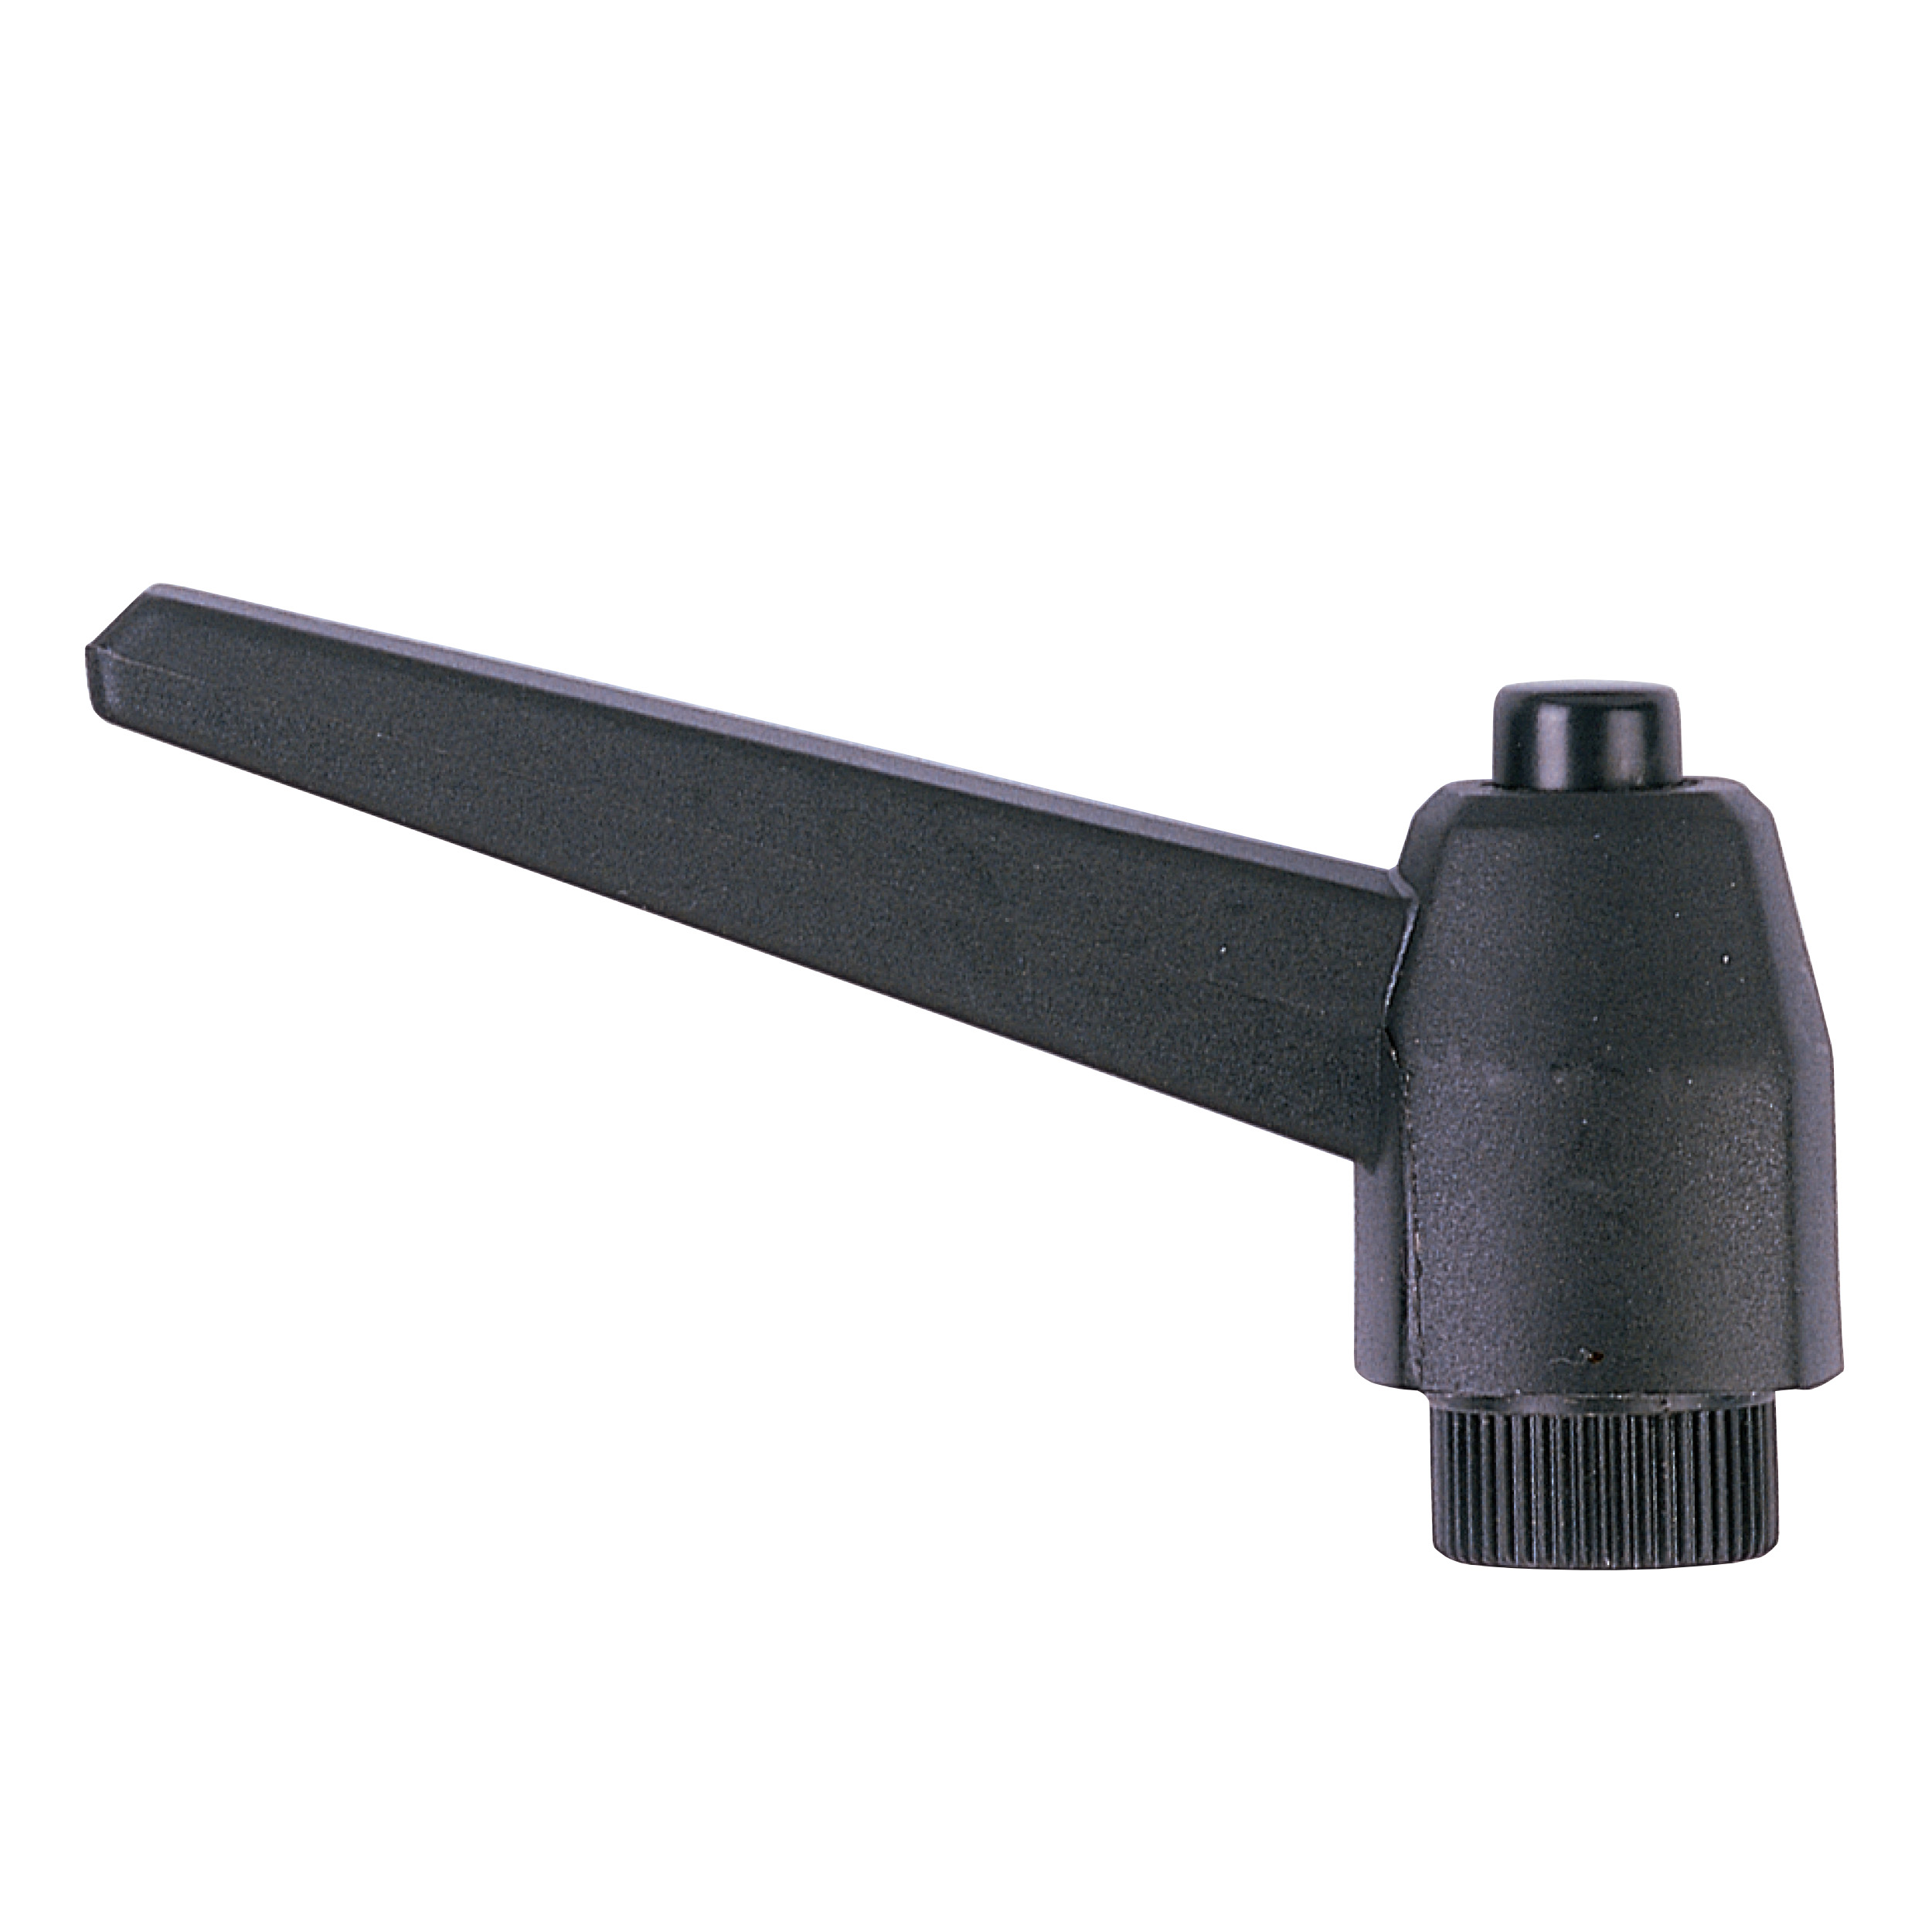 Adjustable Handle With 5/16" - 18 Insert